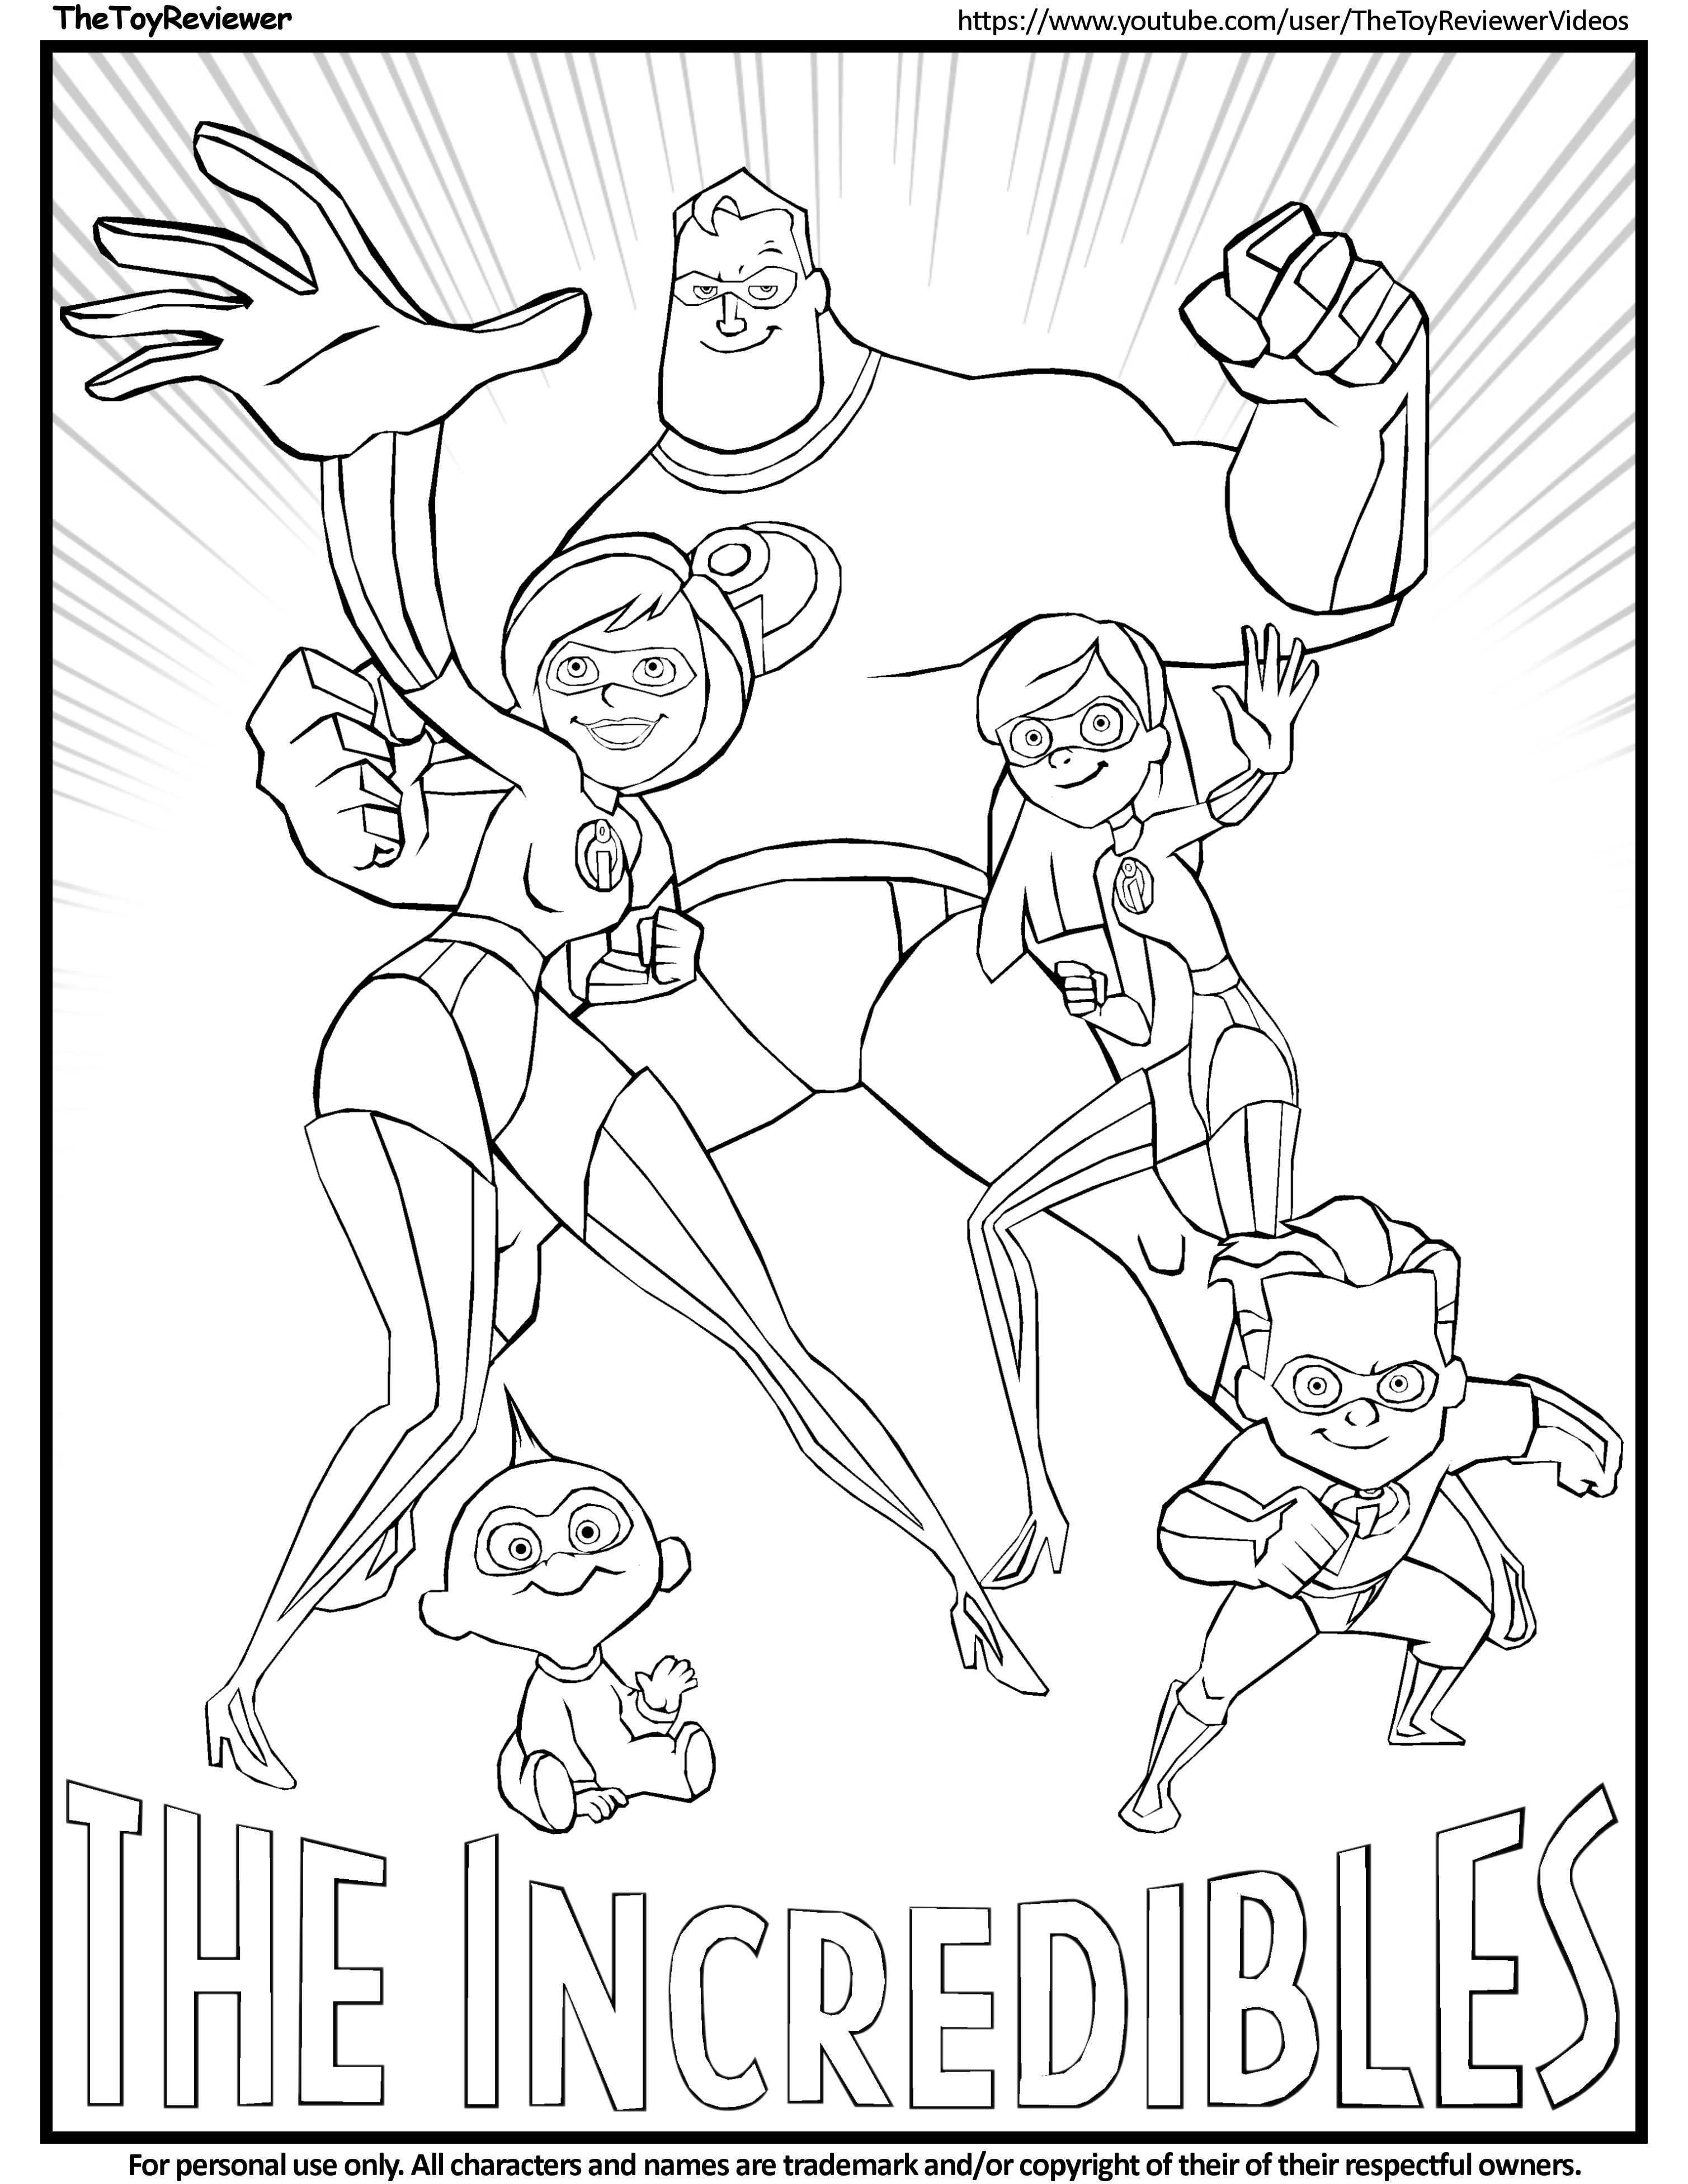 Here Is The The Incredibles 2 Coloring Page Click The Picture To See My Coloring Vide